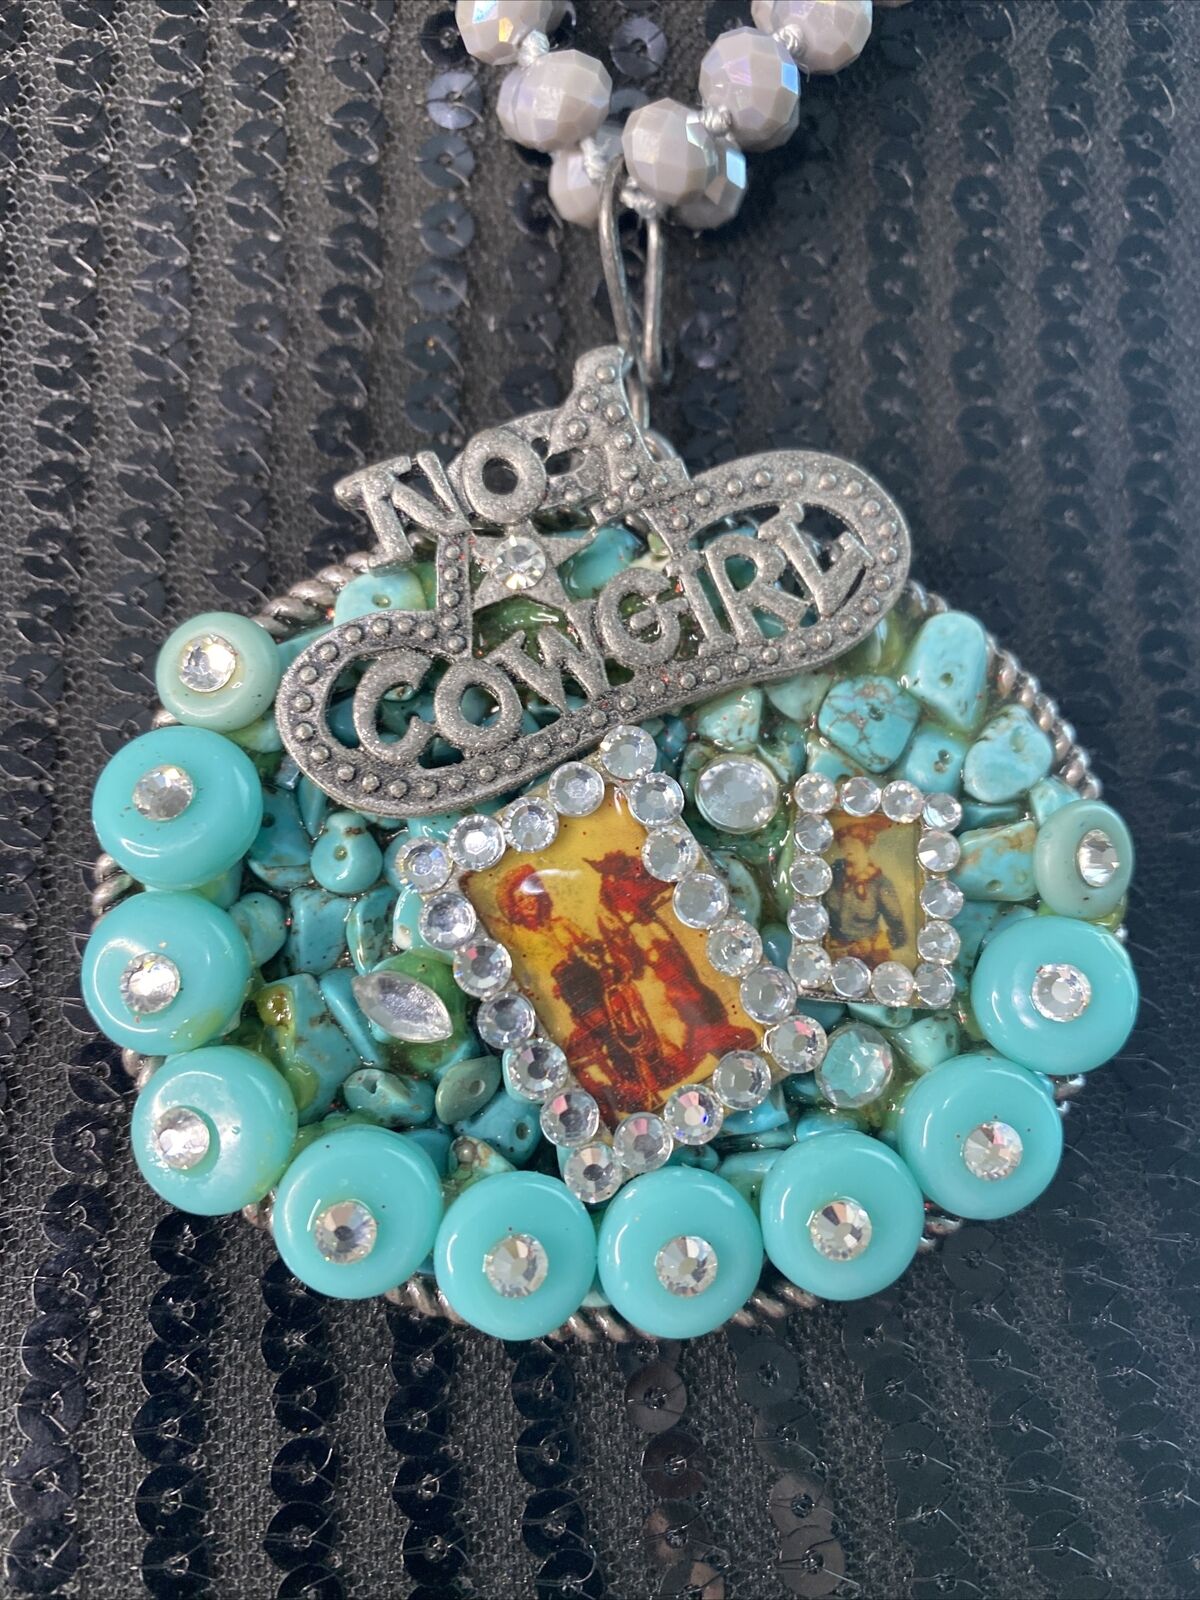 Cowgirl Buckle Blingy Maximalist Necklace Pendant One Of A Kind